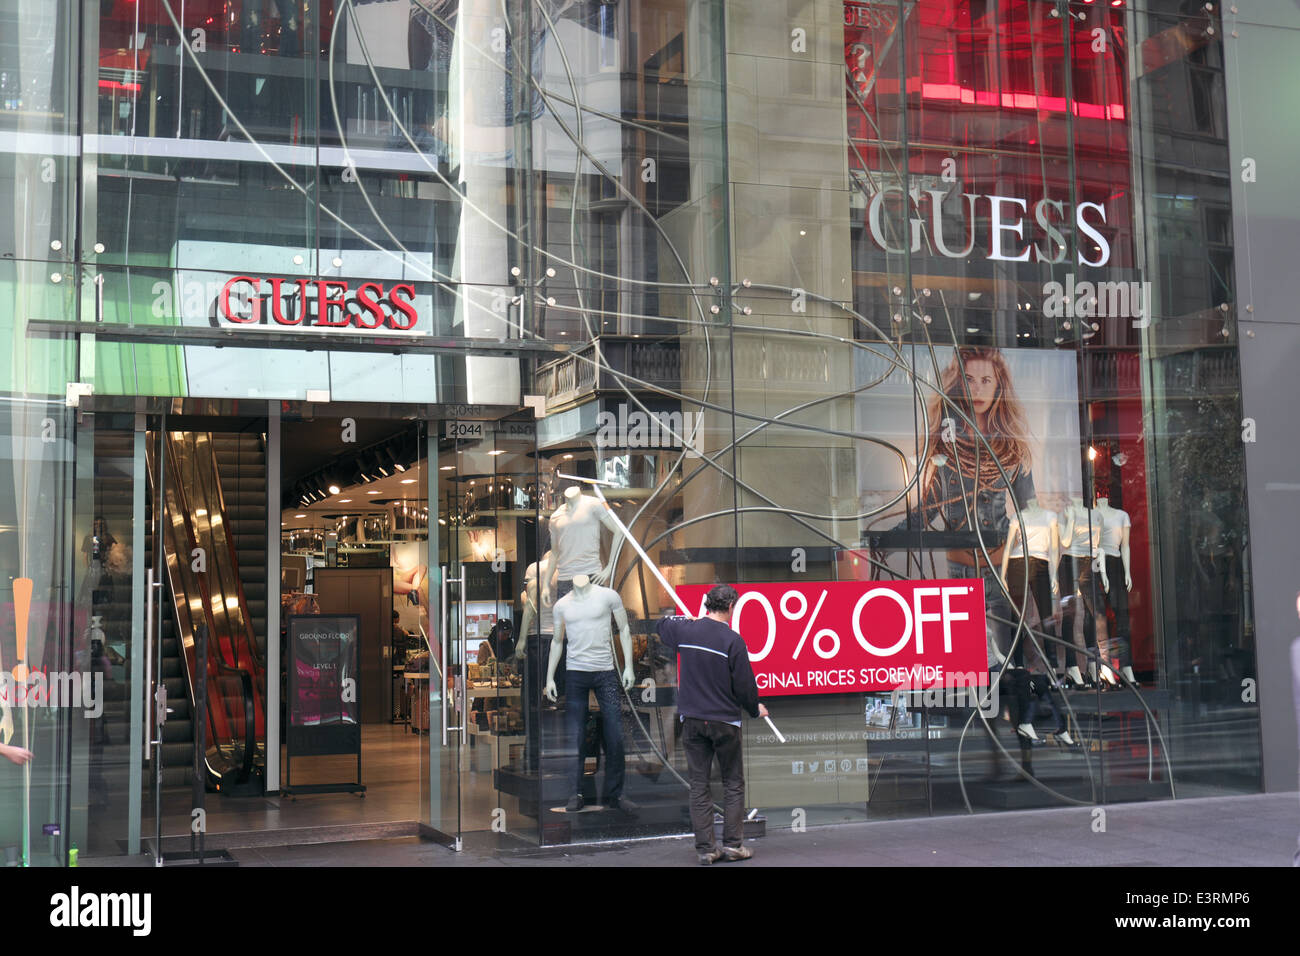 Guess Store High Resolution Stock Photography and Images -